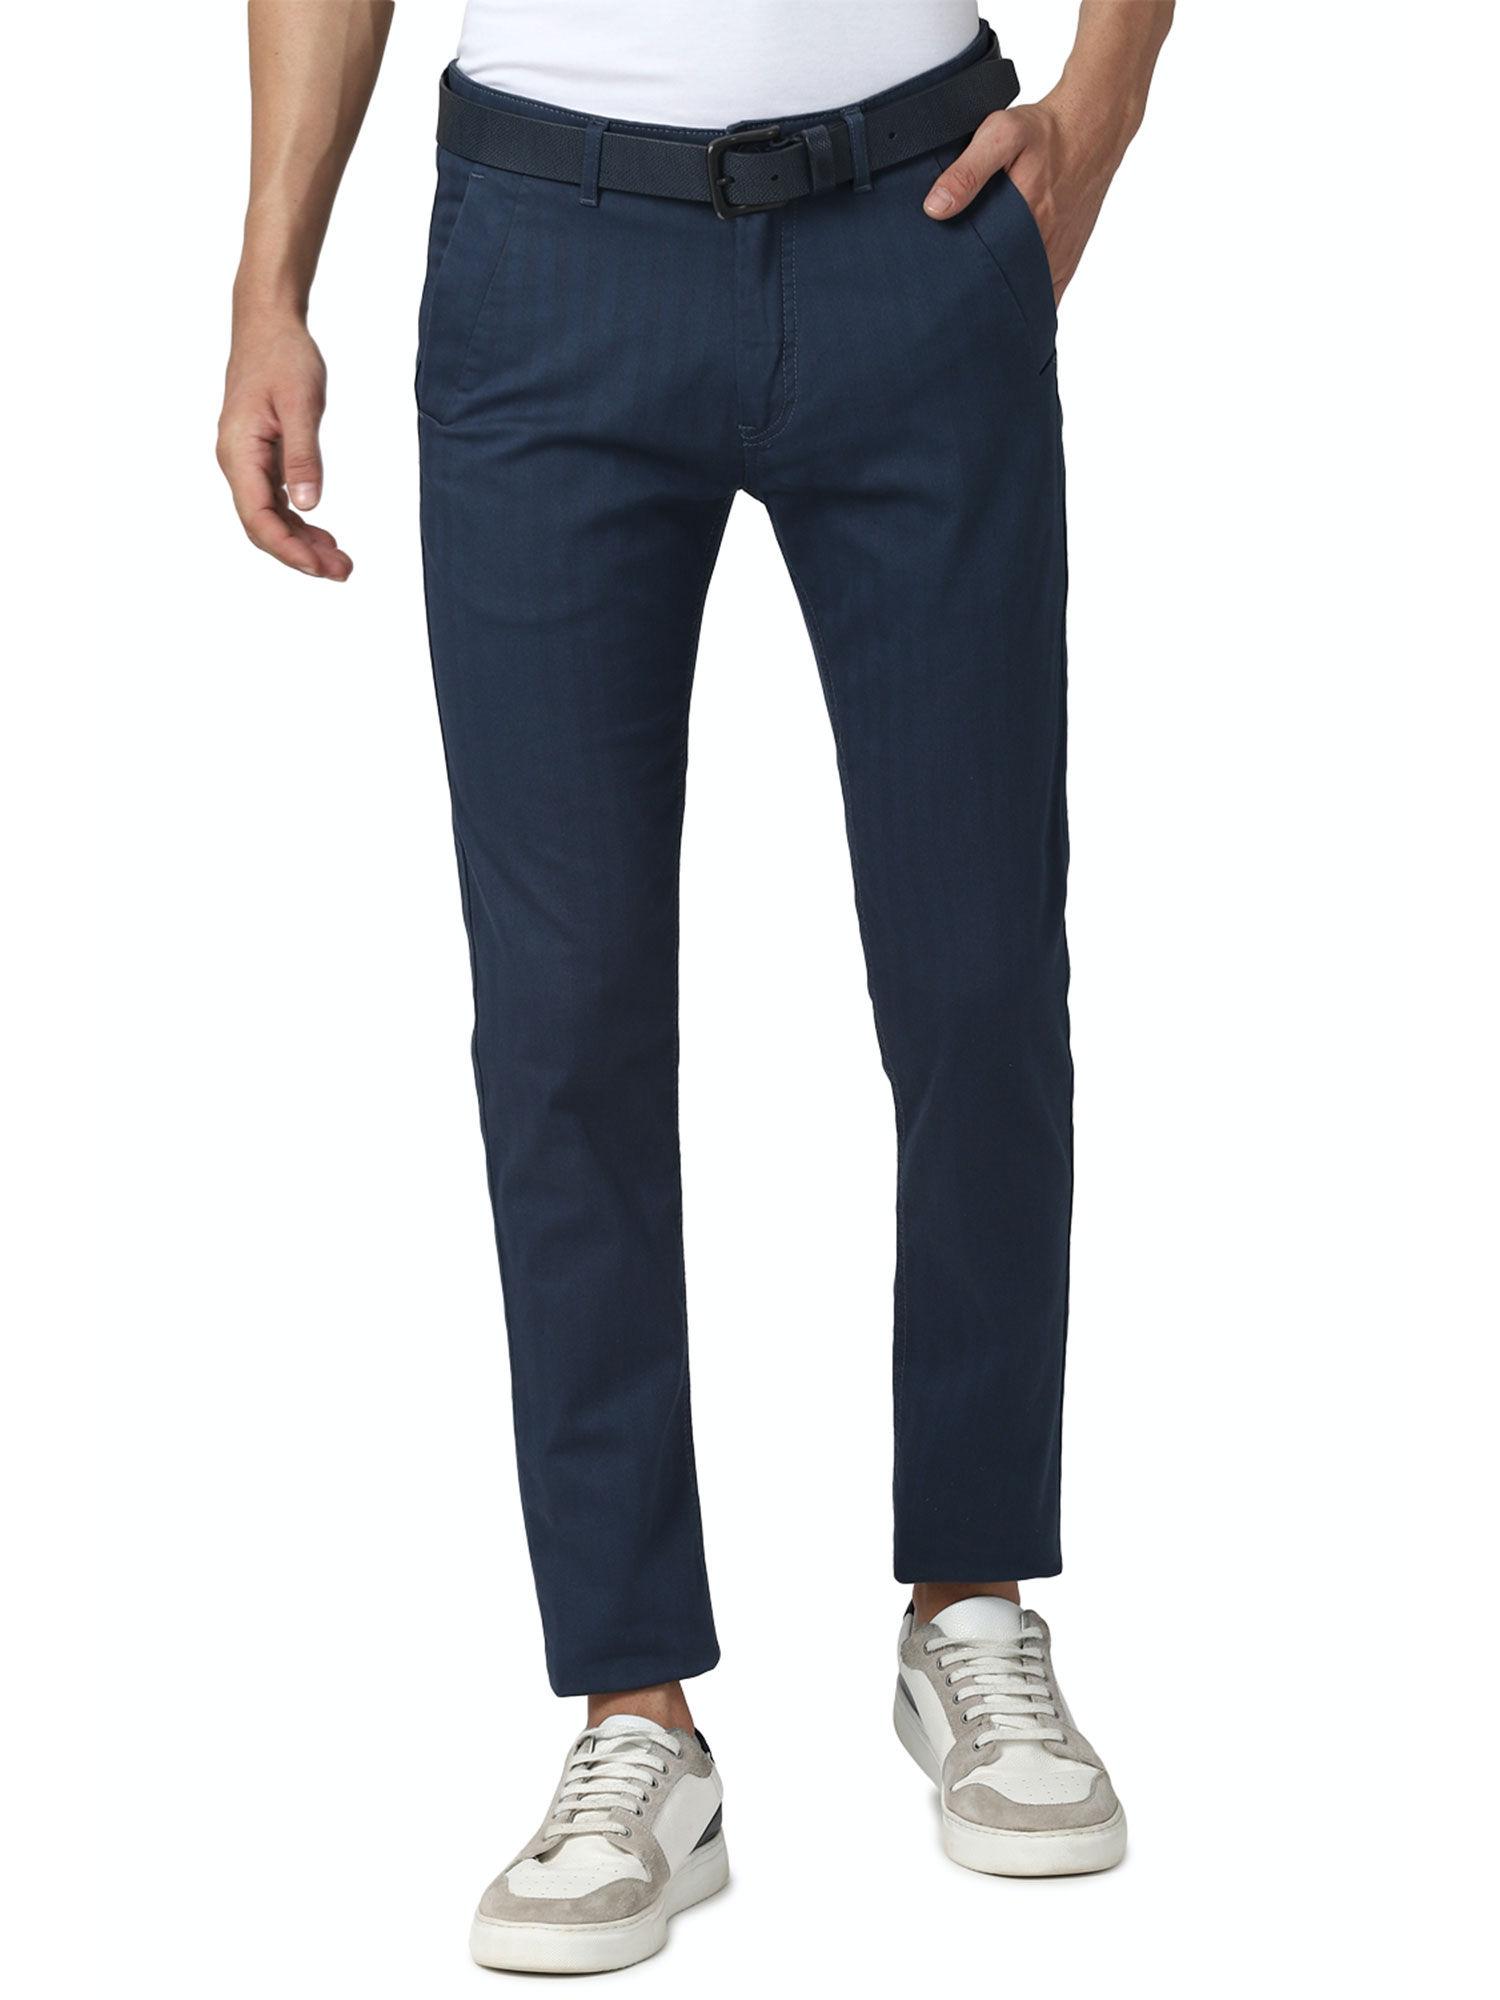 navy-blue-casual-trouser